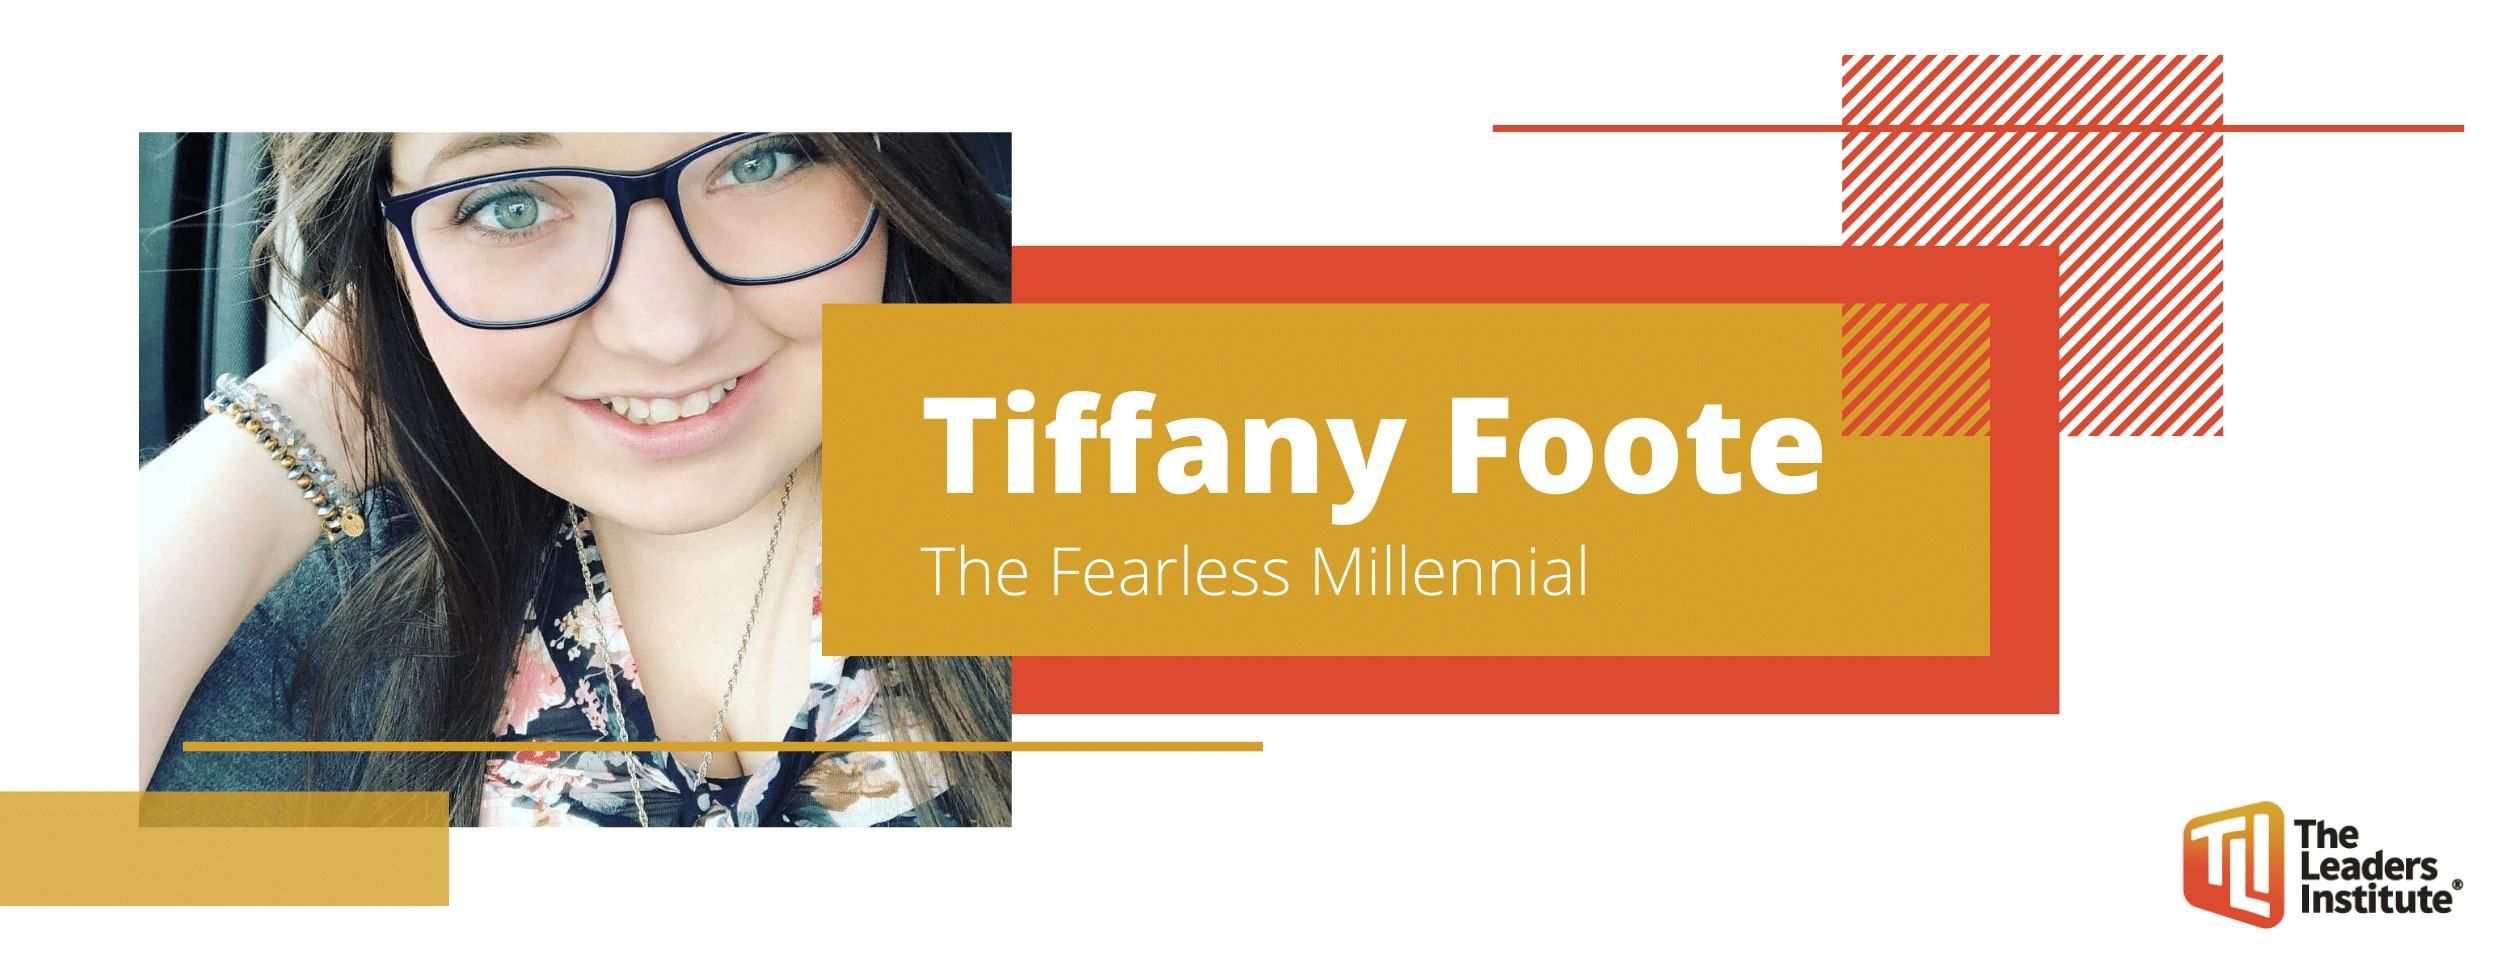 Tiffany Foote, The Fearless Millennial